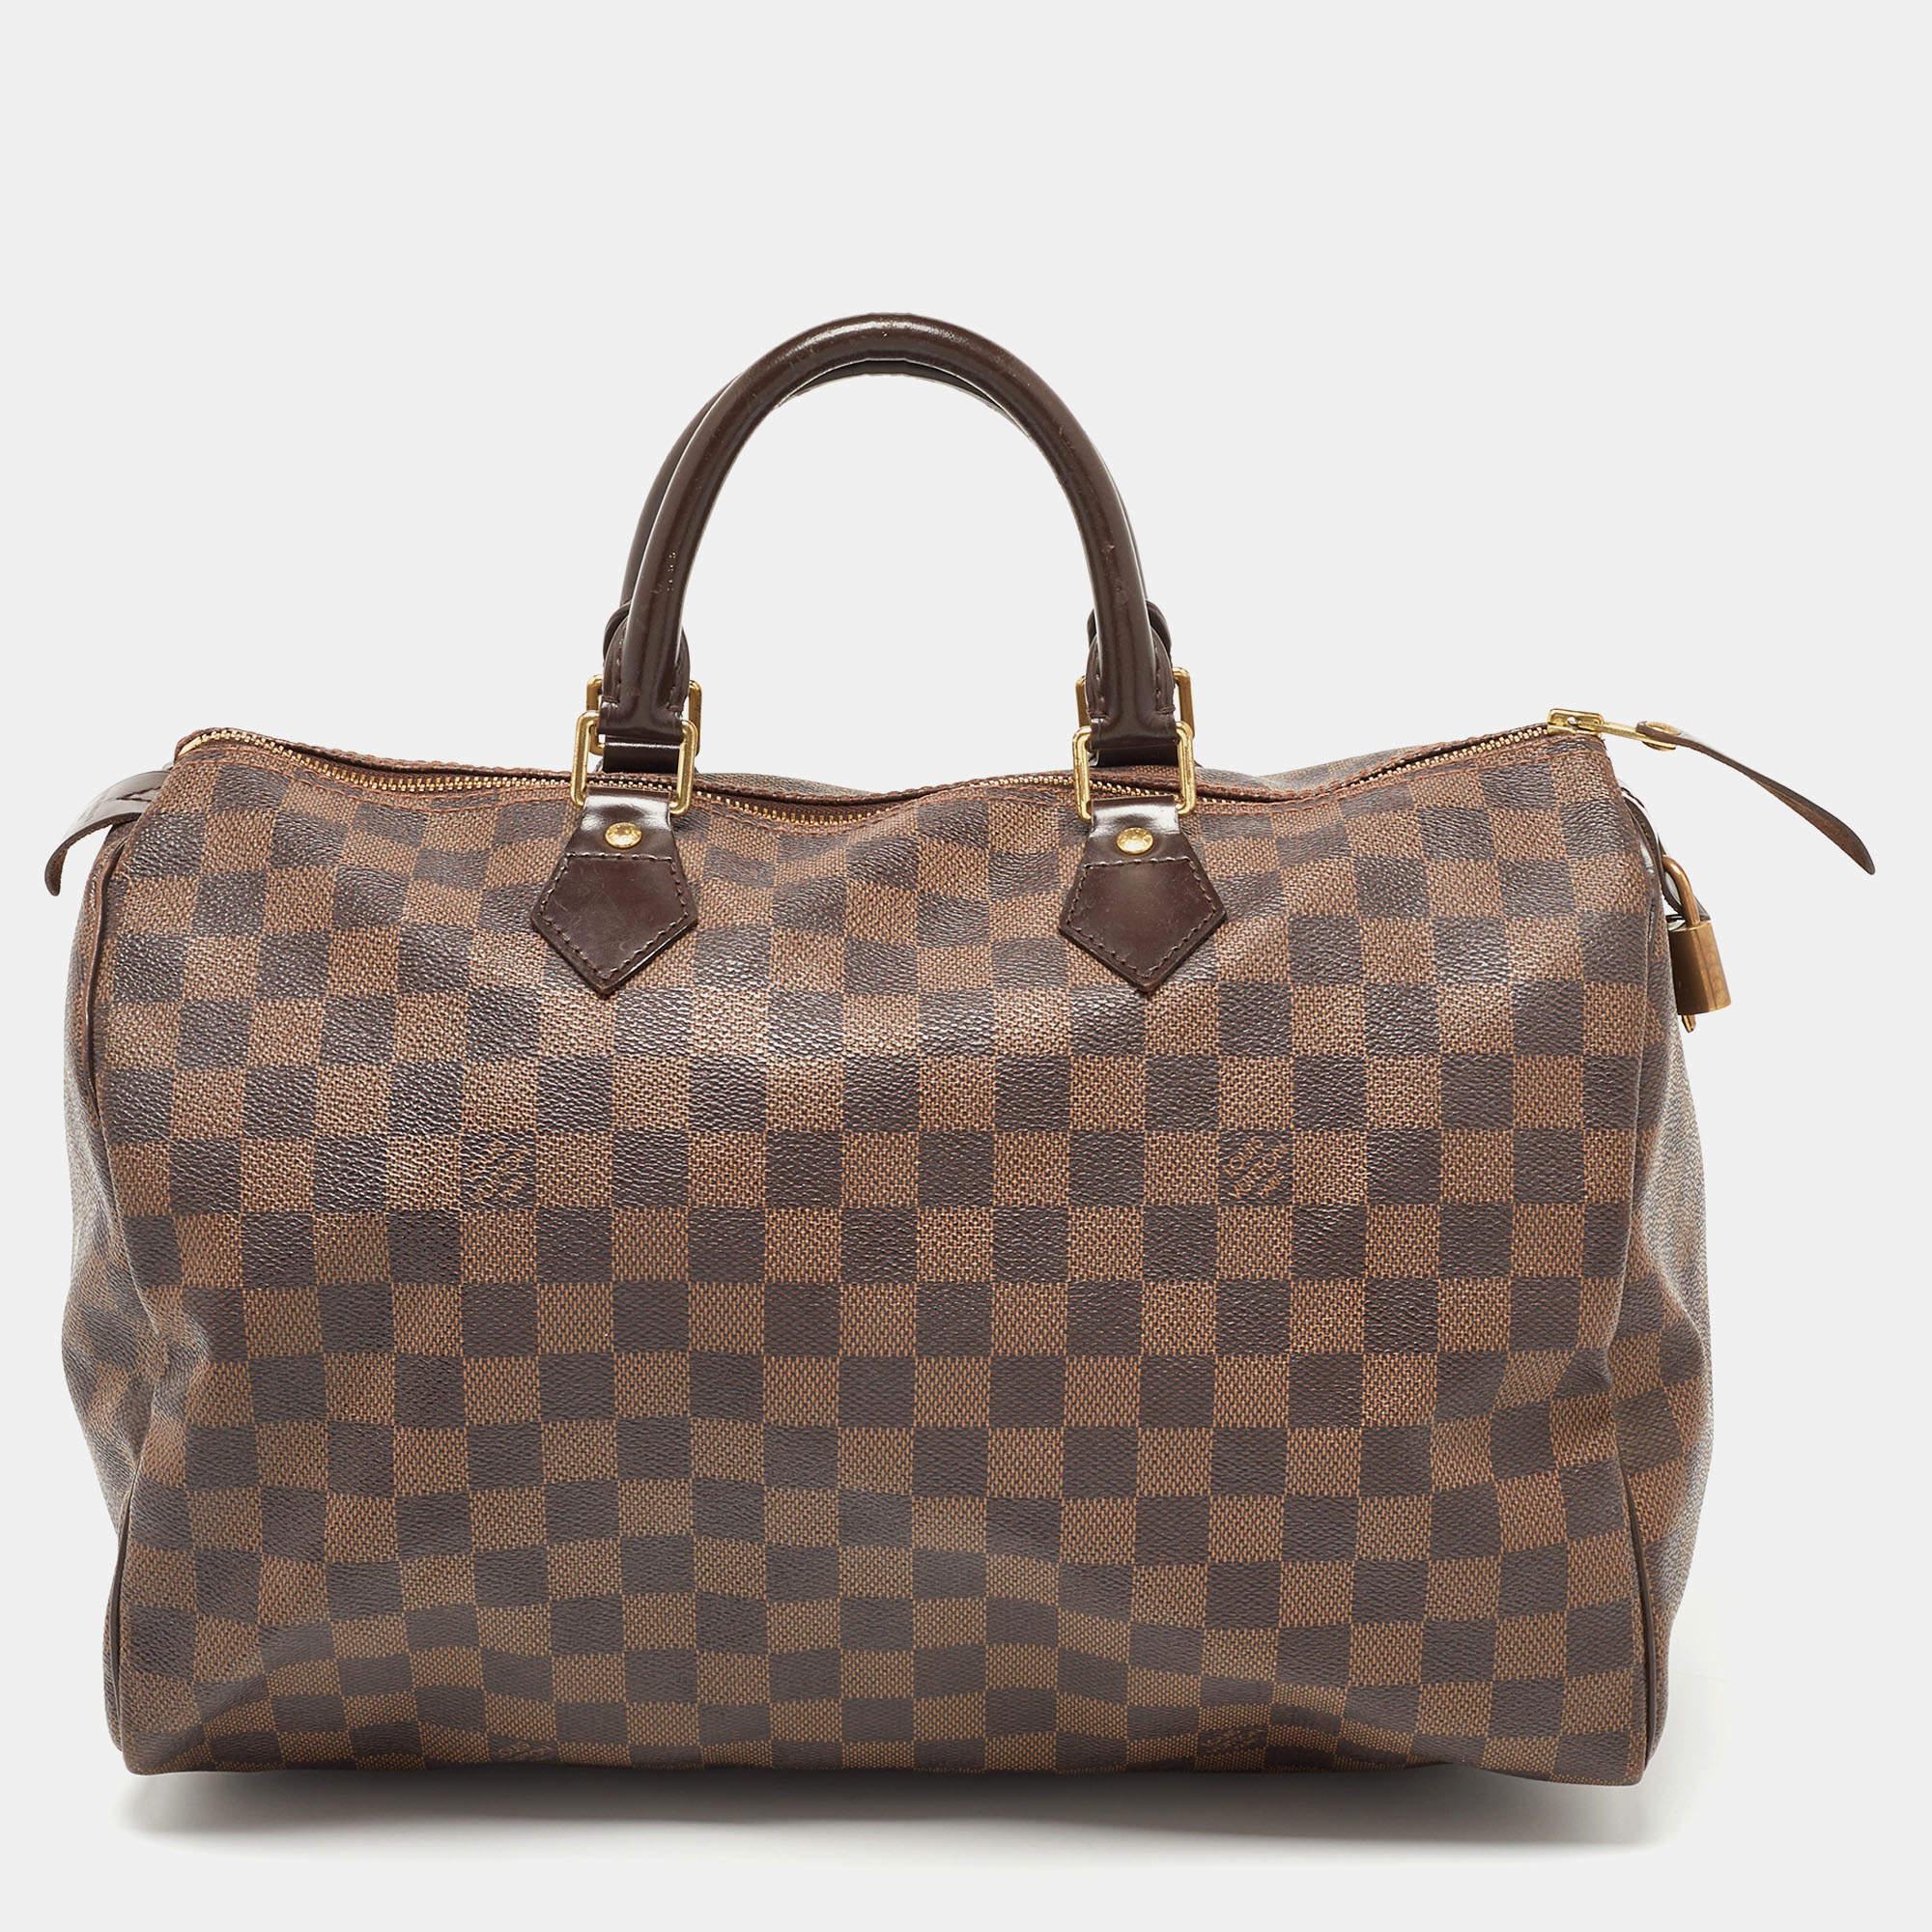 Regarded as one of the greatest handbags in the history of luxury fashion, the Speedy from Louis Vuitton was first created for everyday use as a smaller version of their famous Keepall bag. This Speedy comes crafted from Damier Ebene coated canvas